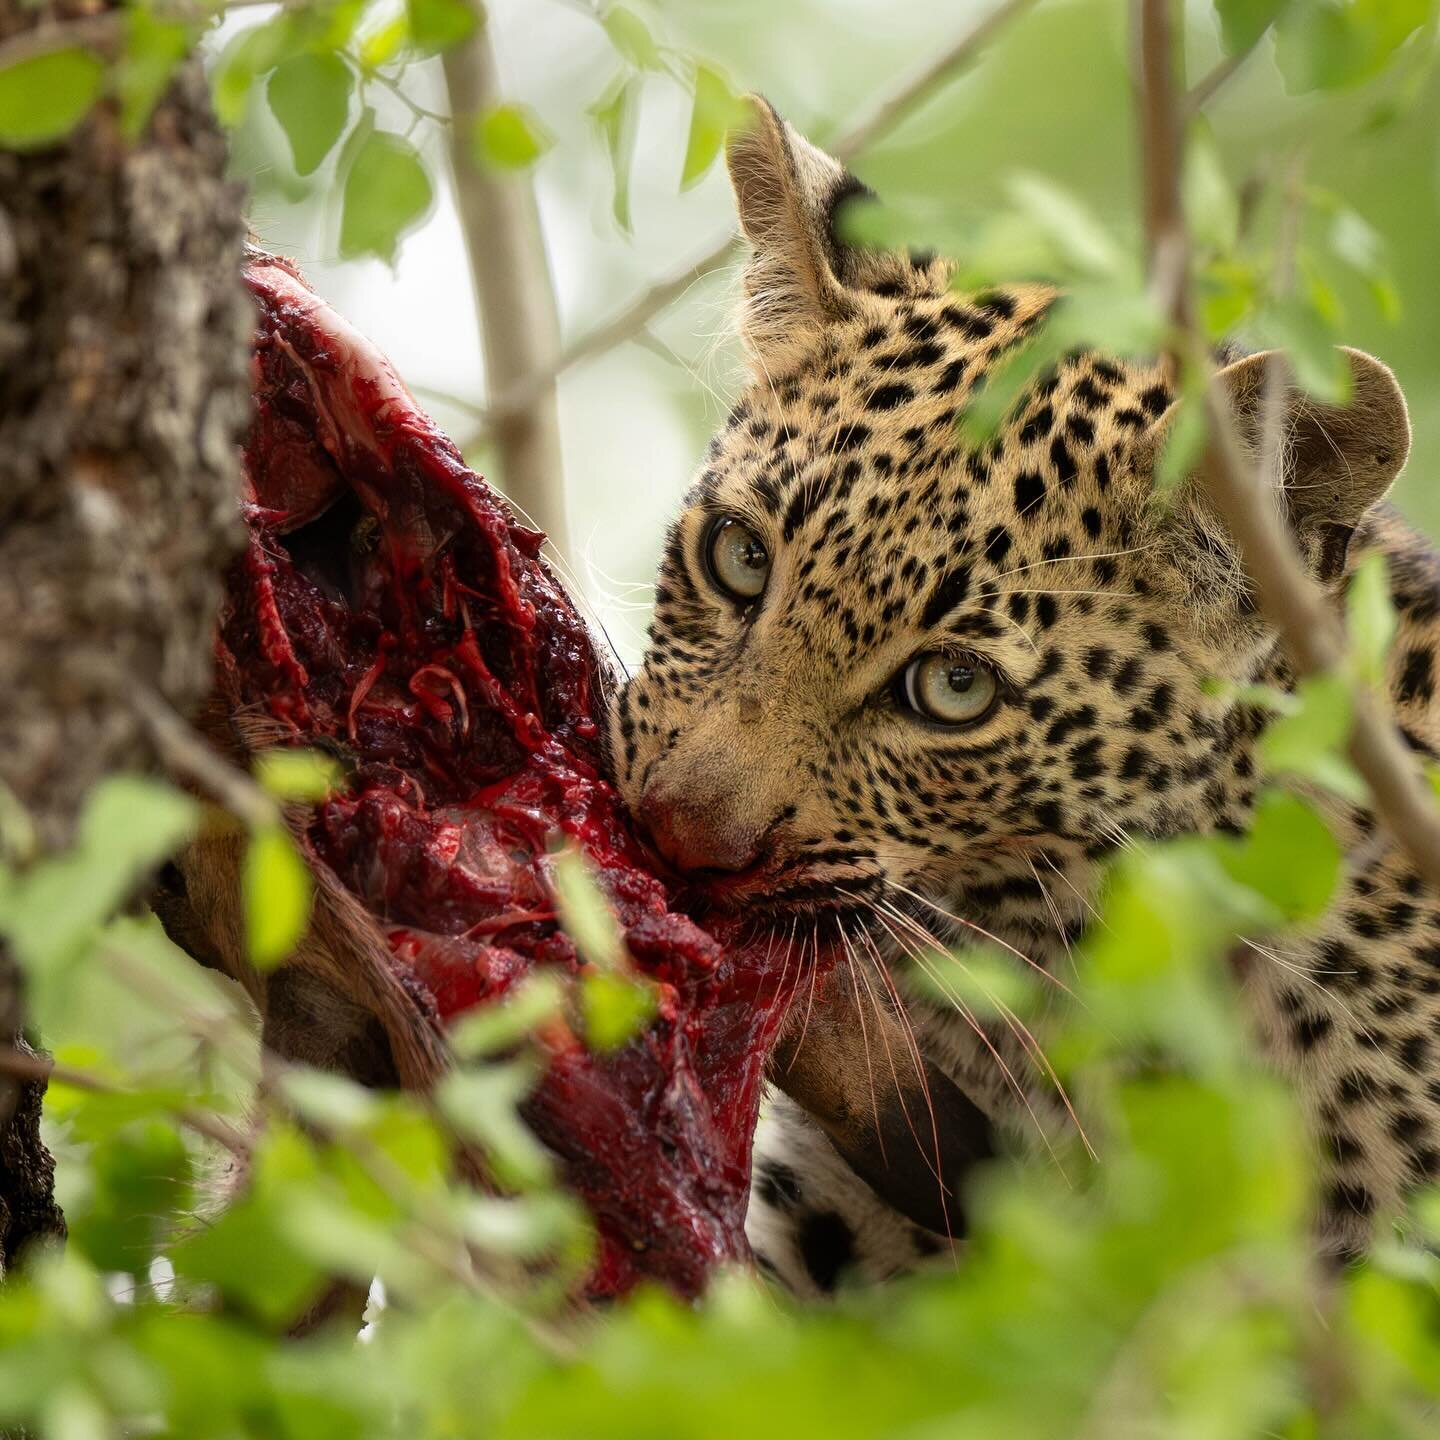 Breakfast for kids looks a little different when you are a leopard. This little one traded on and off with a sibling and mom in a tree with food while the others played on the ground. 
.
.
.
#womenphotography#all_animals_addiction#wildlife_perfection